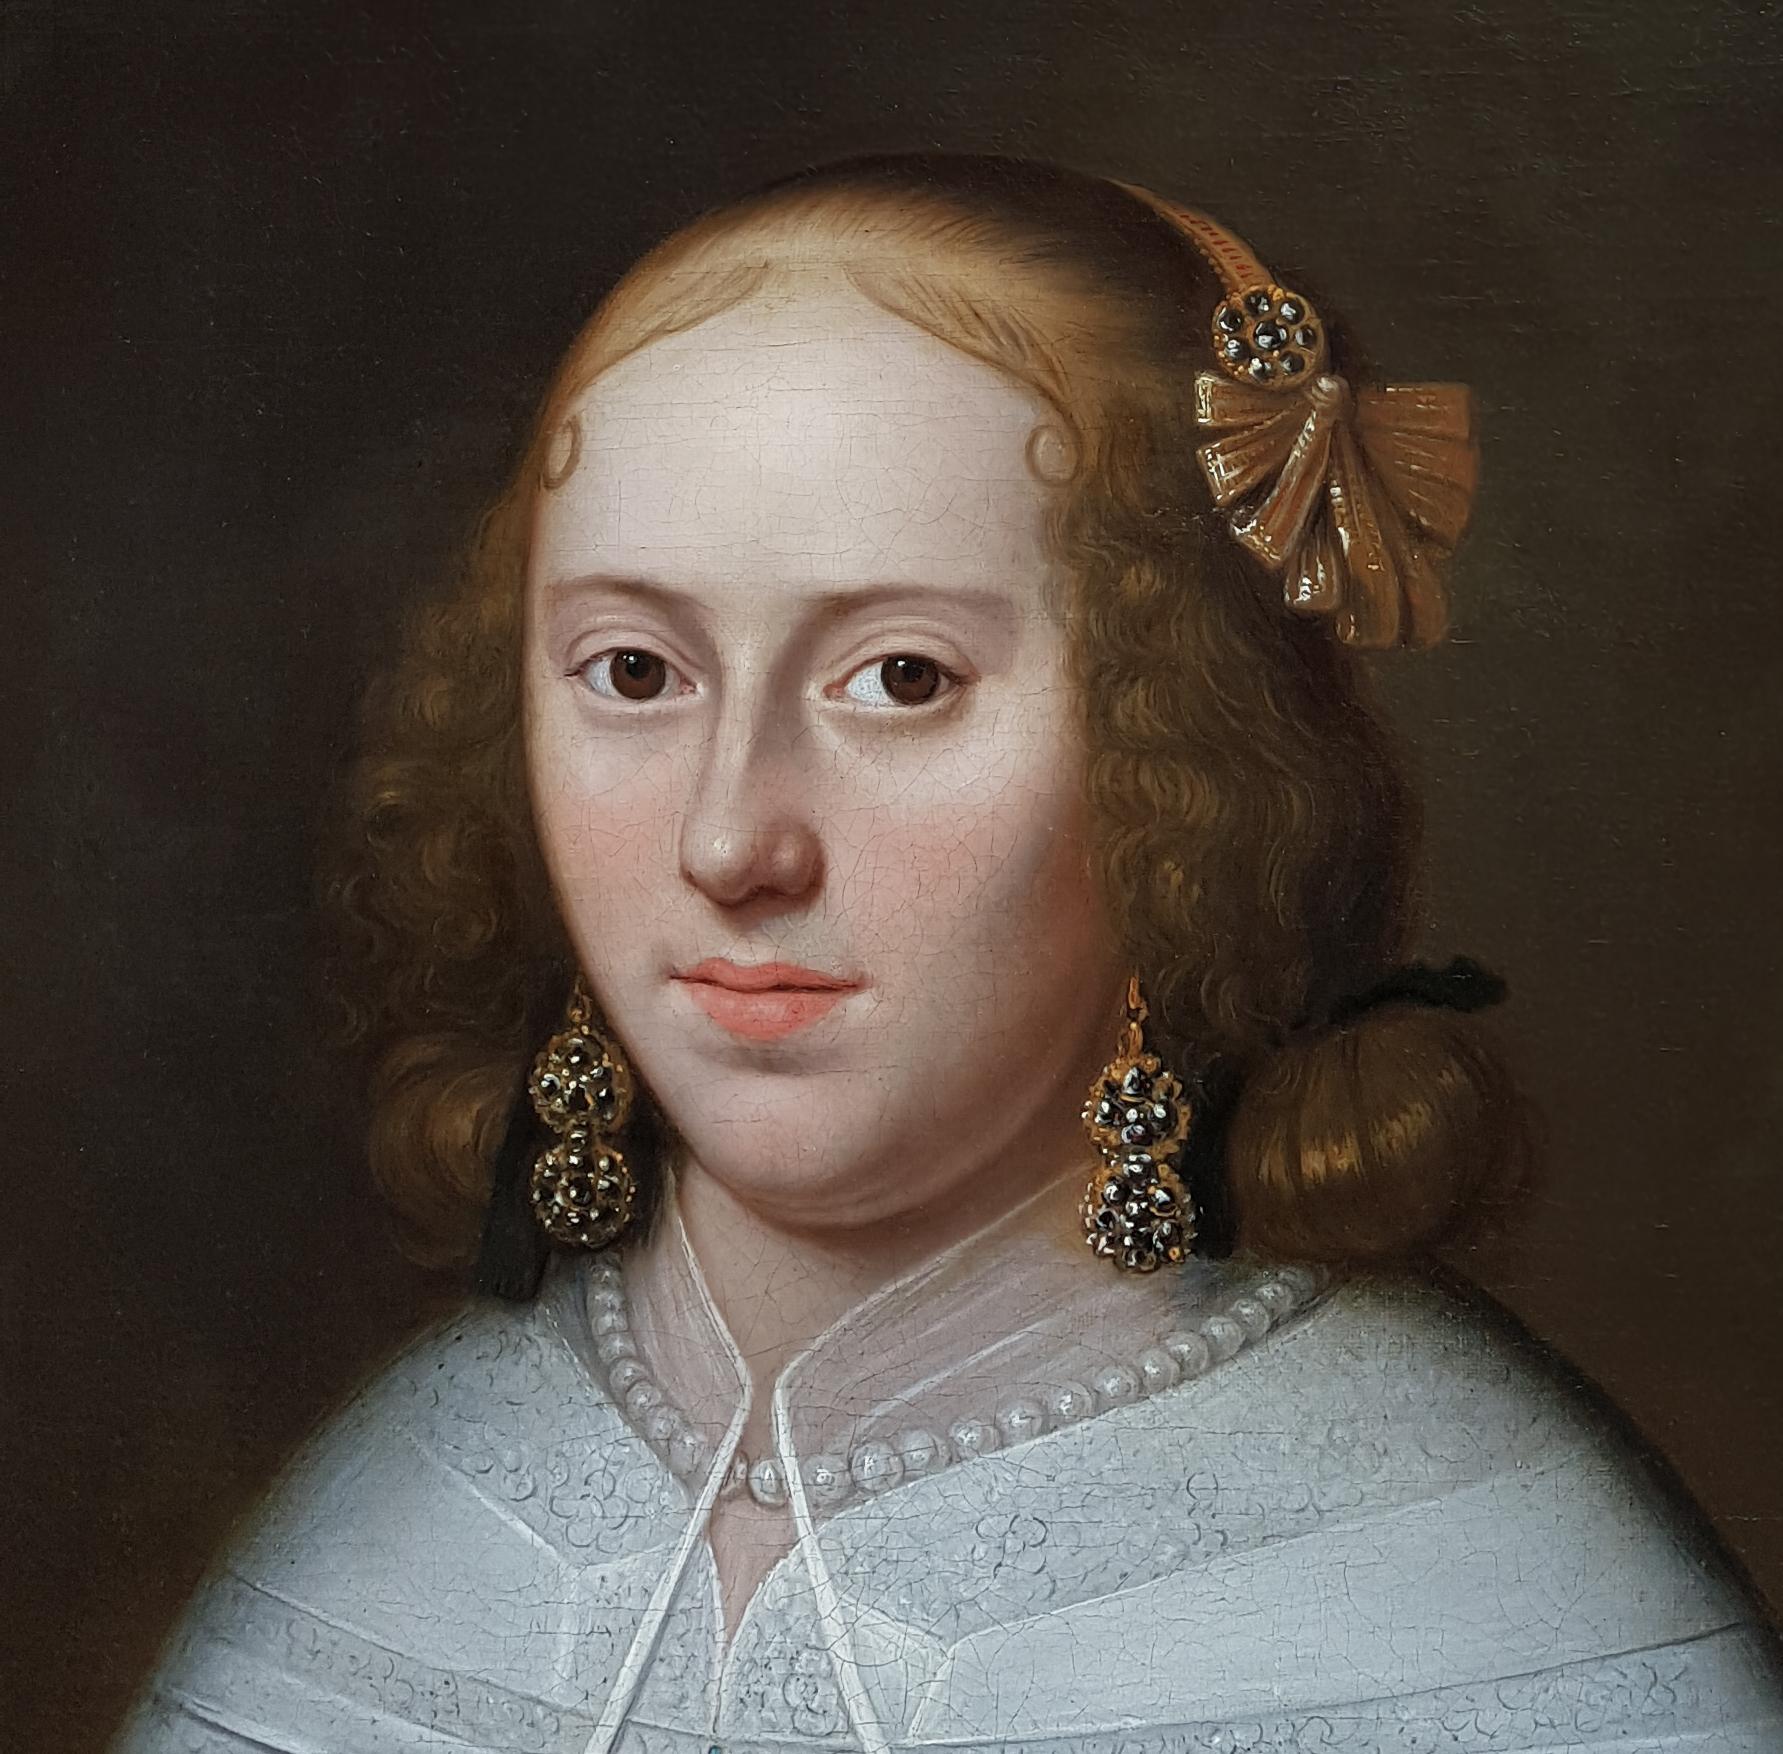 Brigitta (Brechje) de Groot spent her entire life in Hoorn, the former Dutch East India Company base in the Netherlands.  She was born on 1st July 1638.  Her father was Allard de Groot (c.1600-1658) and was the Mayor and Alderman of Hoorn for some